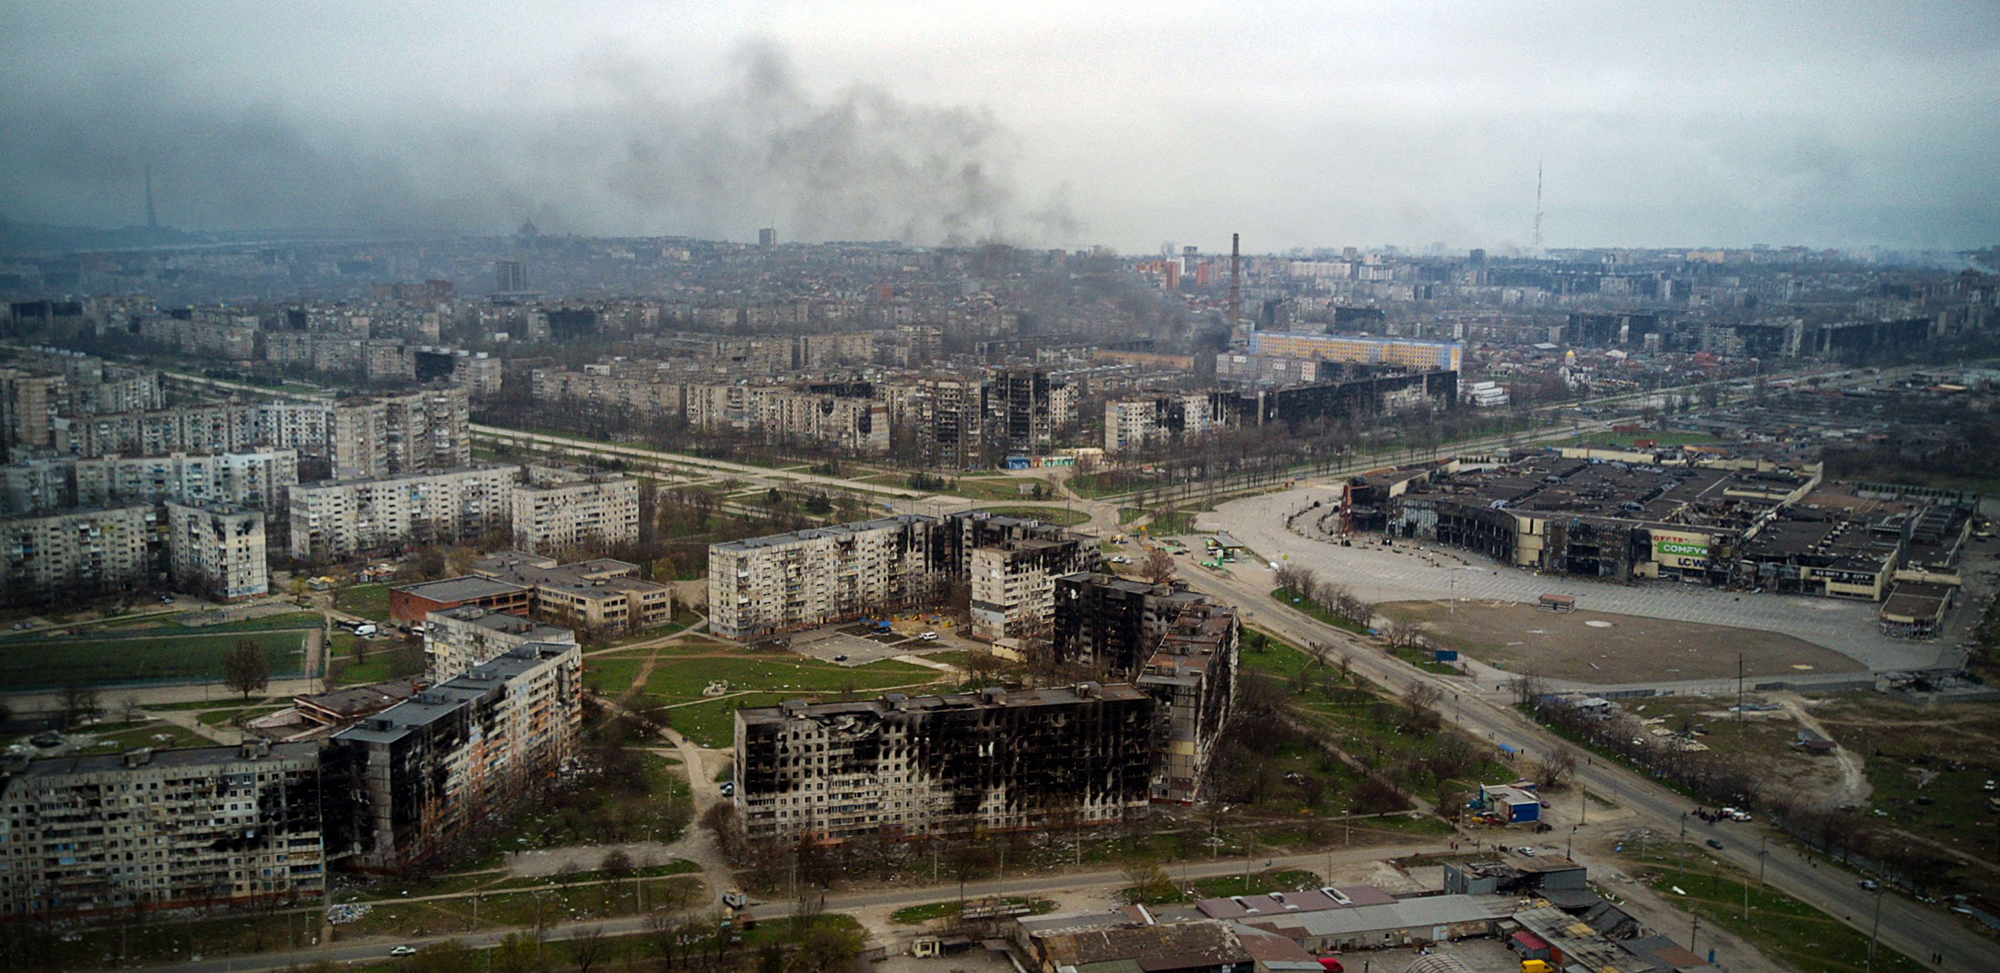 An aerial view taken on April 12, shows the city of Mariupol, Ukraine, after intense fighting.